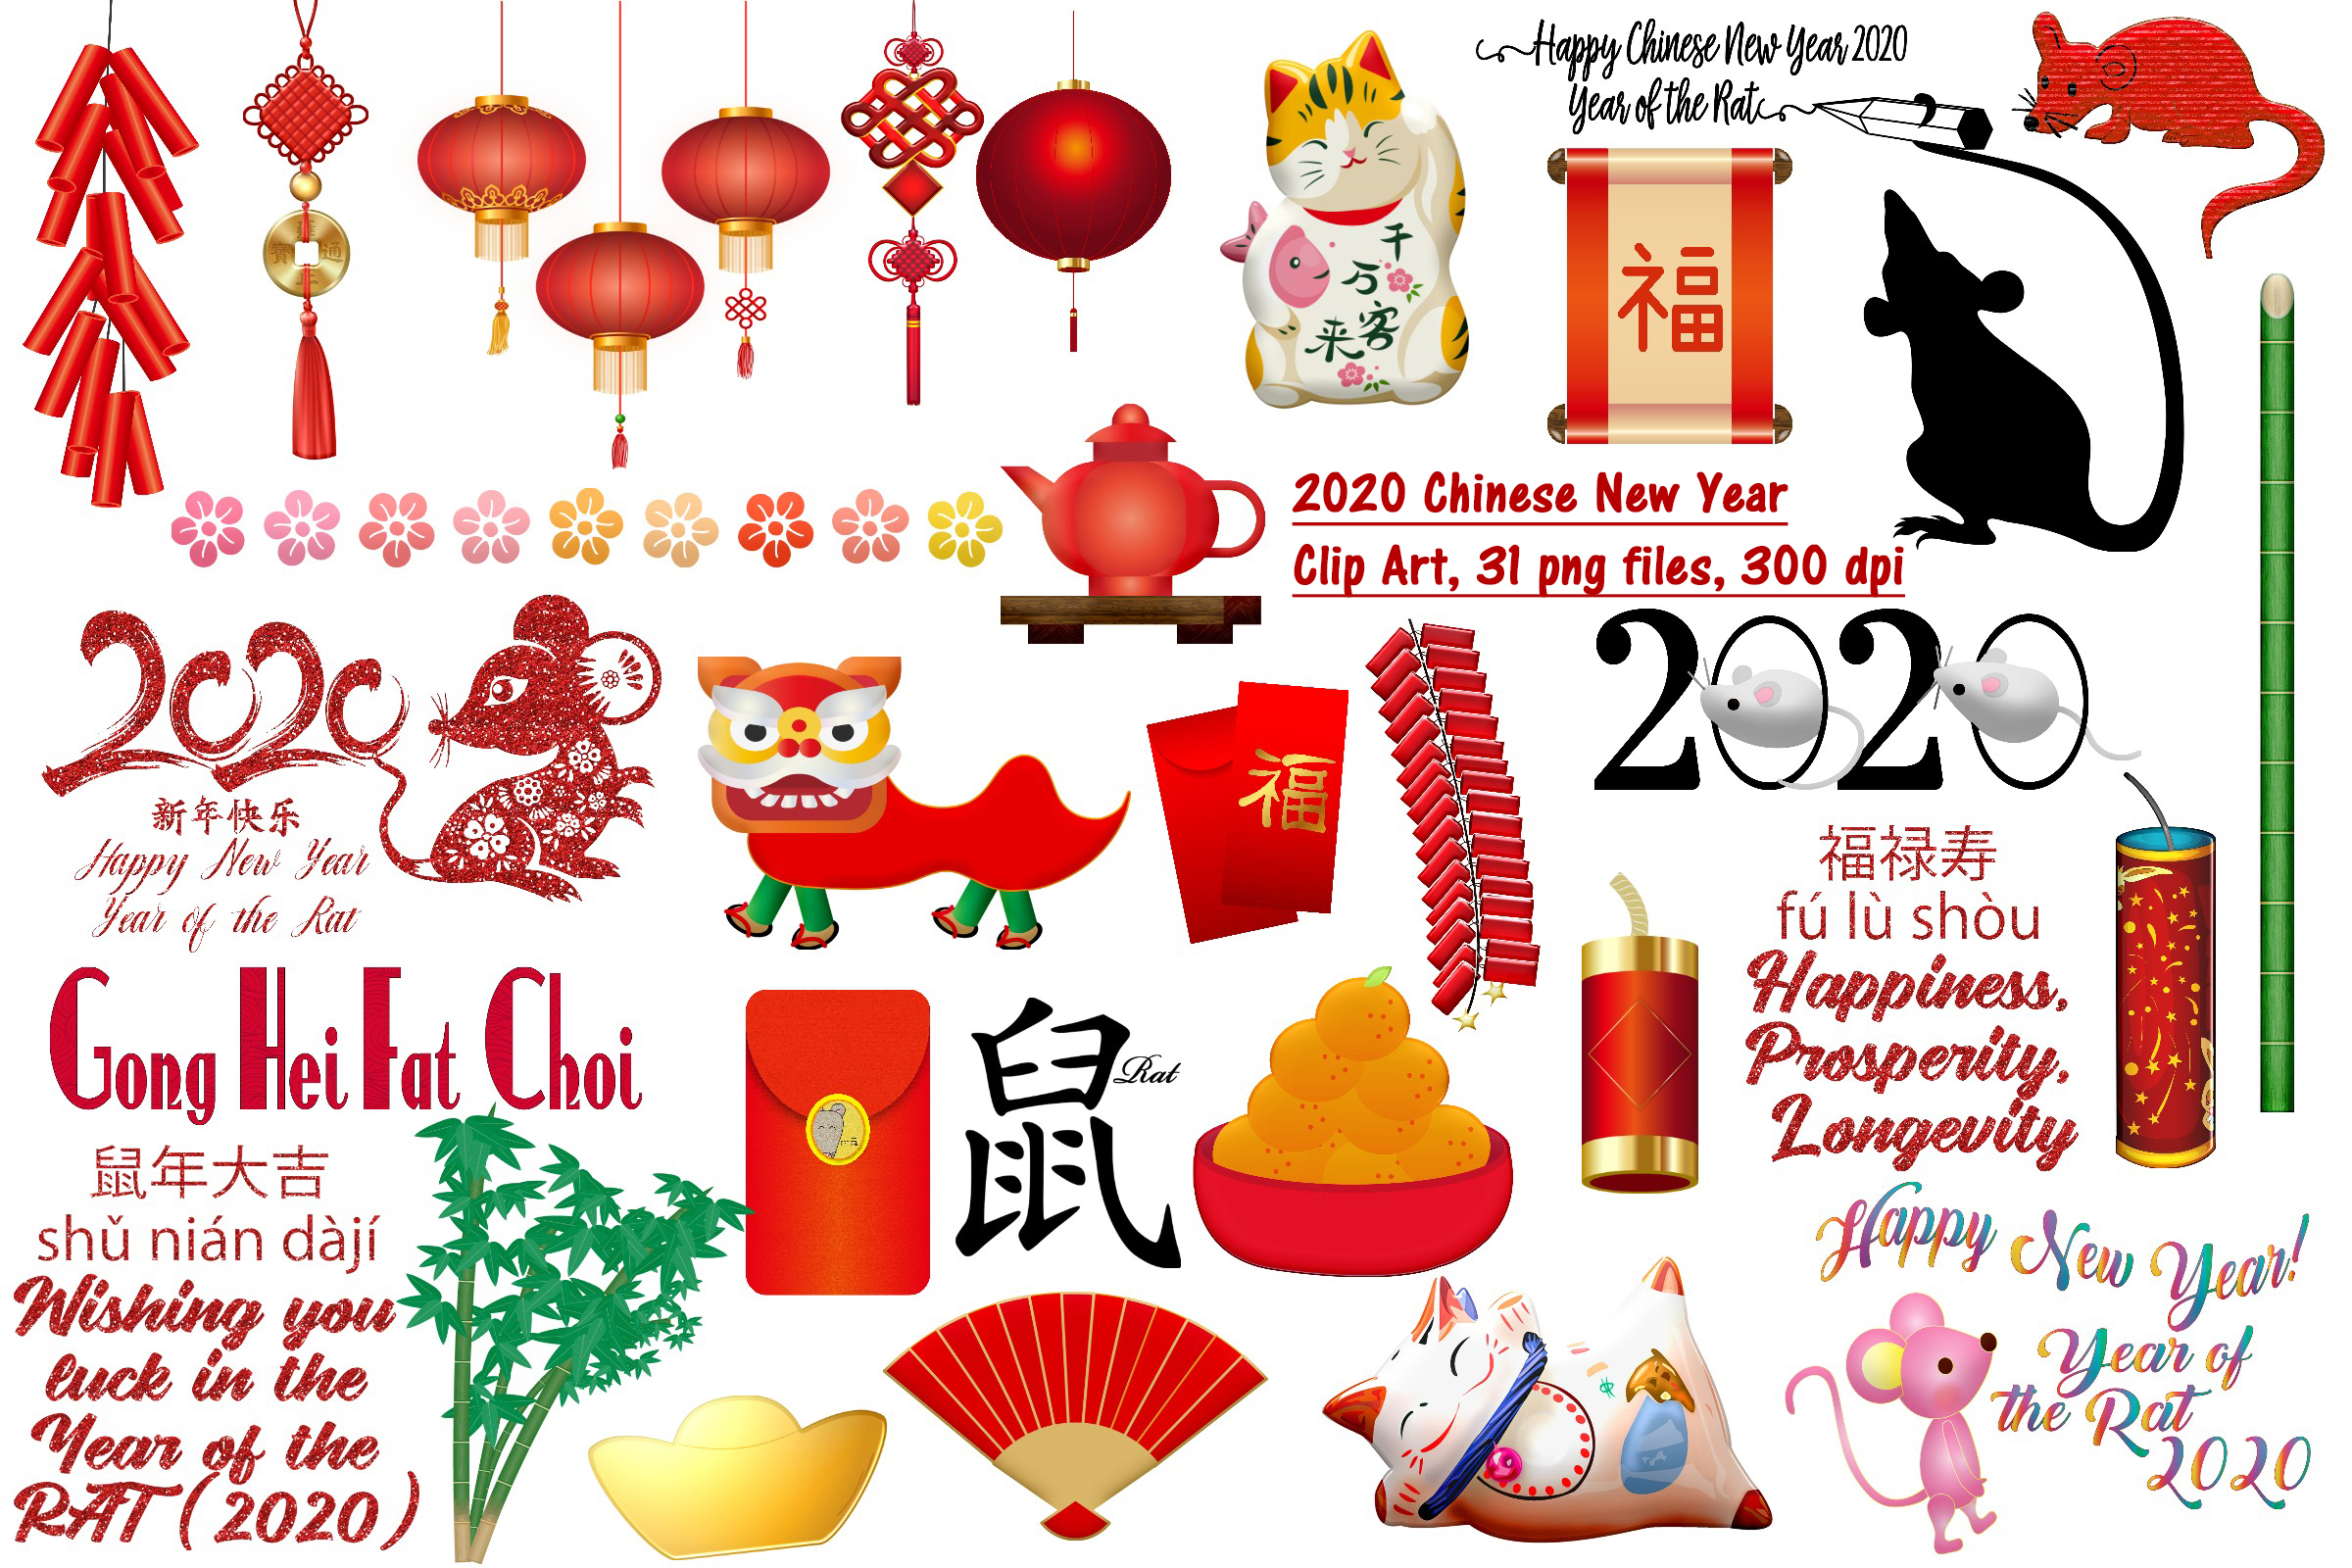 Chinese New Year 2020 Clip Art2400 x 1600